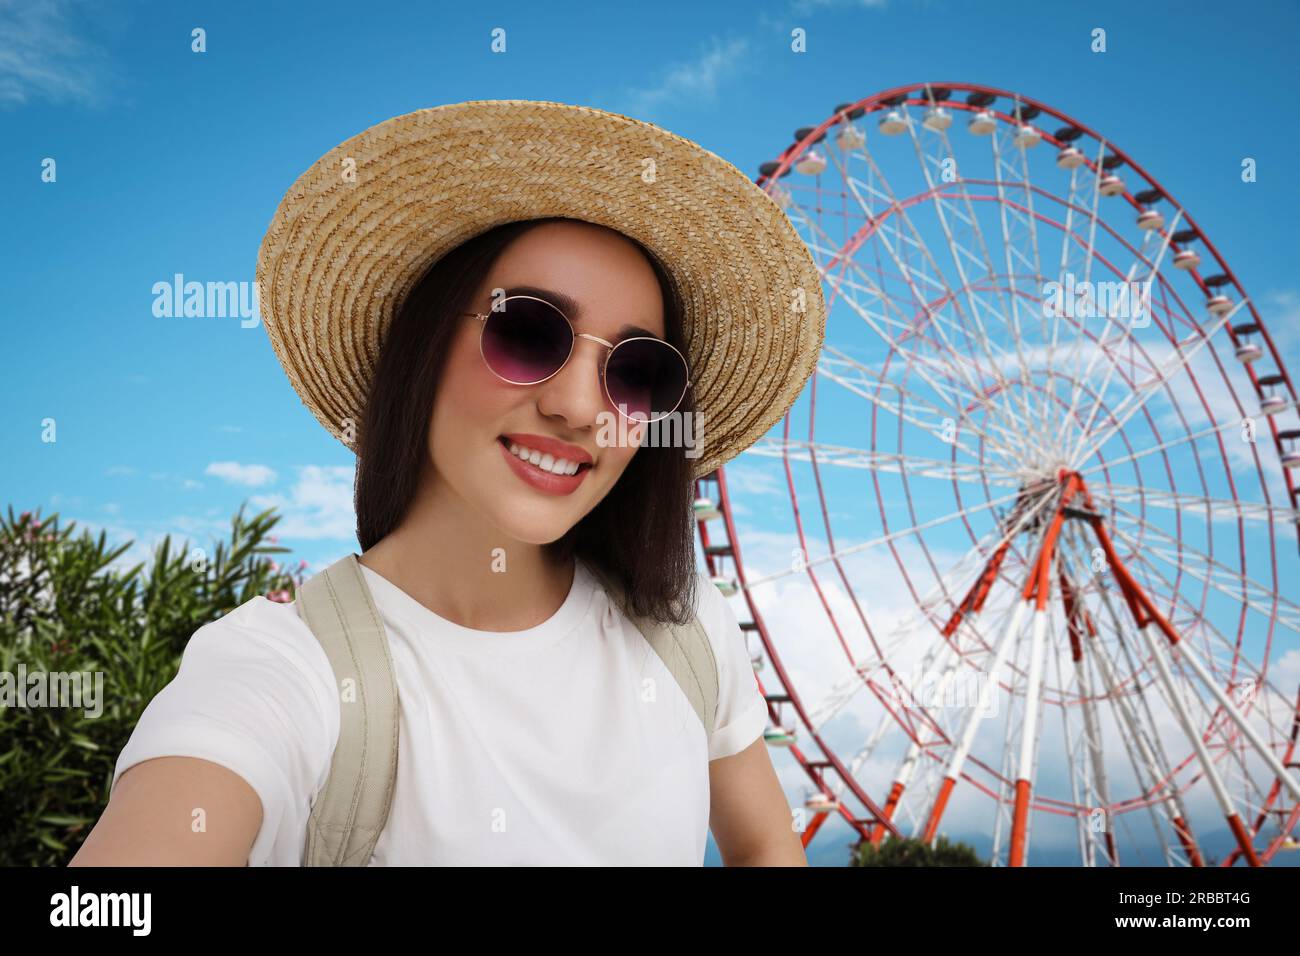 Smiling young woman in sunglasses and straw hat taking selfie near observation wheel Stock Photo